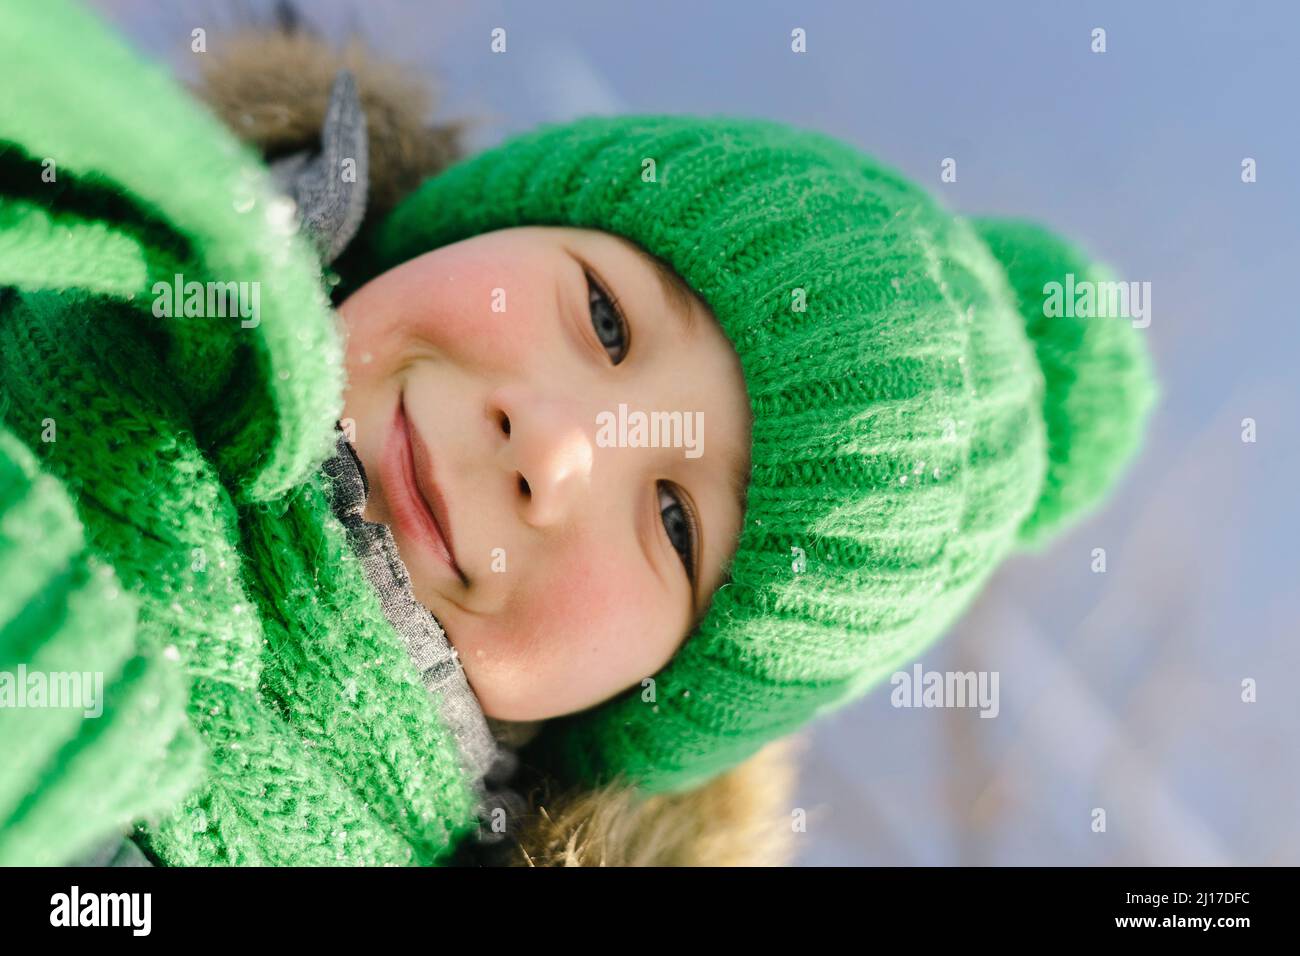 Smiling boy wearing green knit hat and scarf Stock Photo